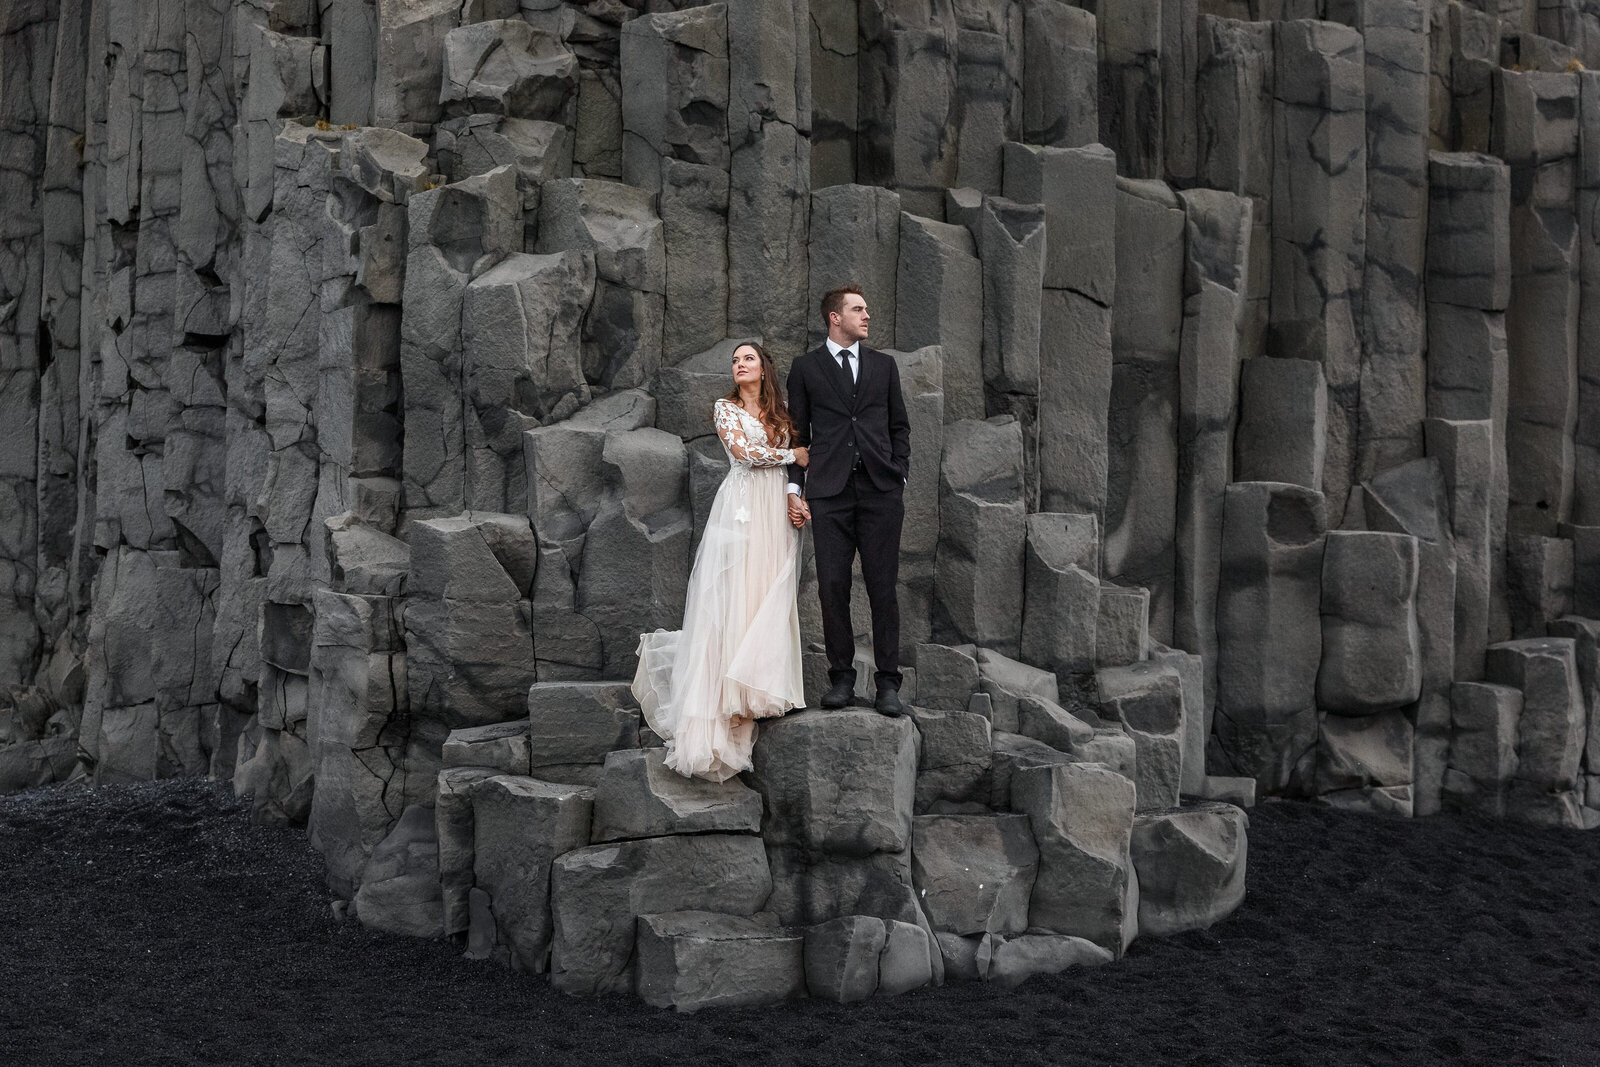 This couple eloped on a black sand beach in Iceland.